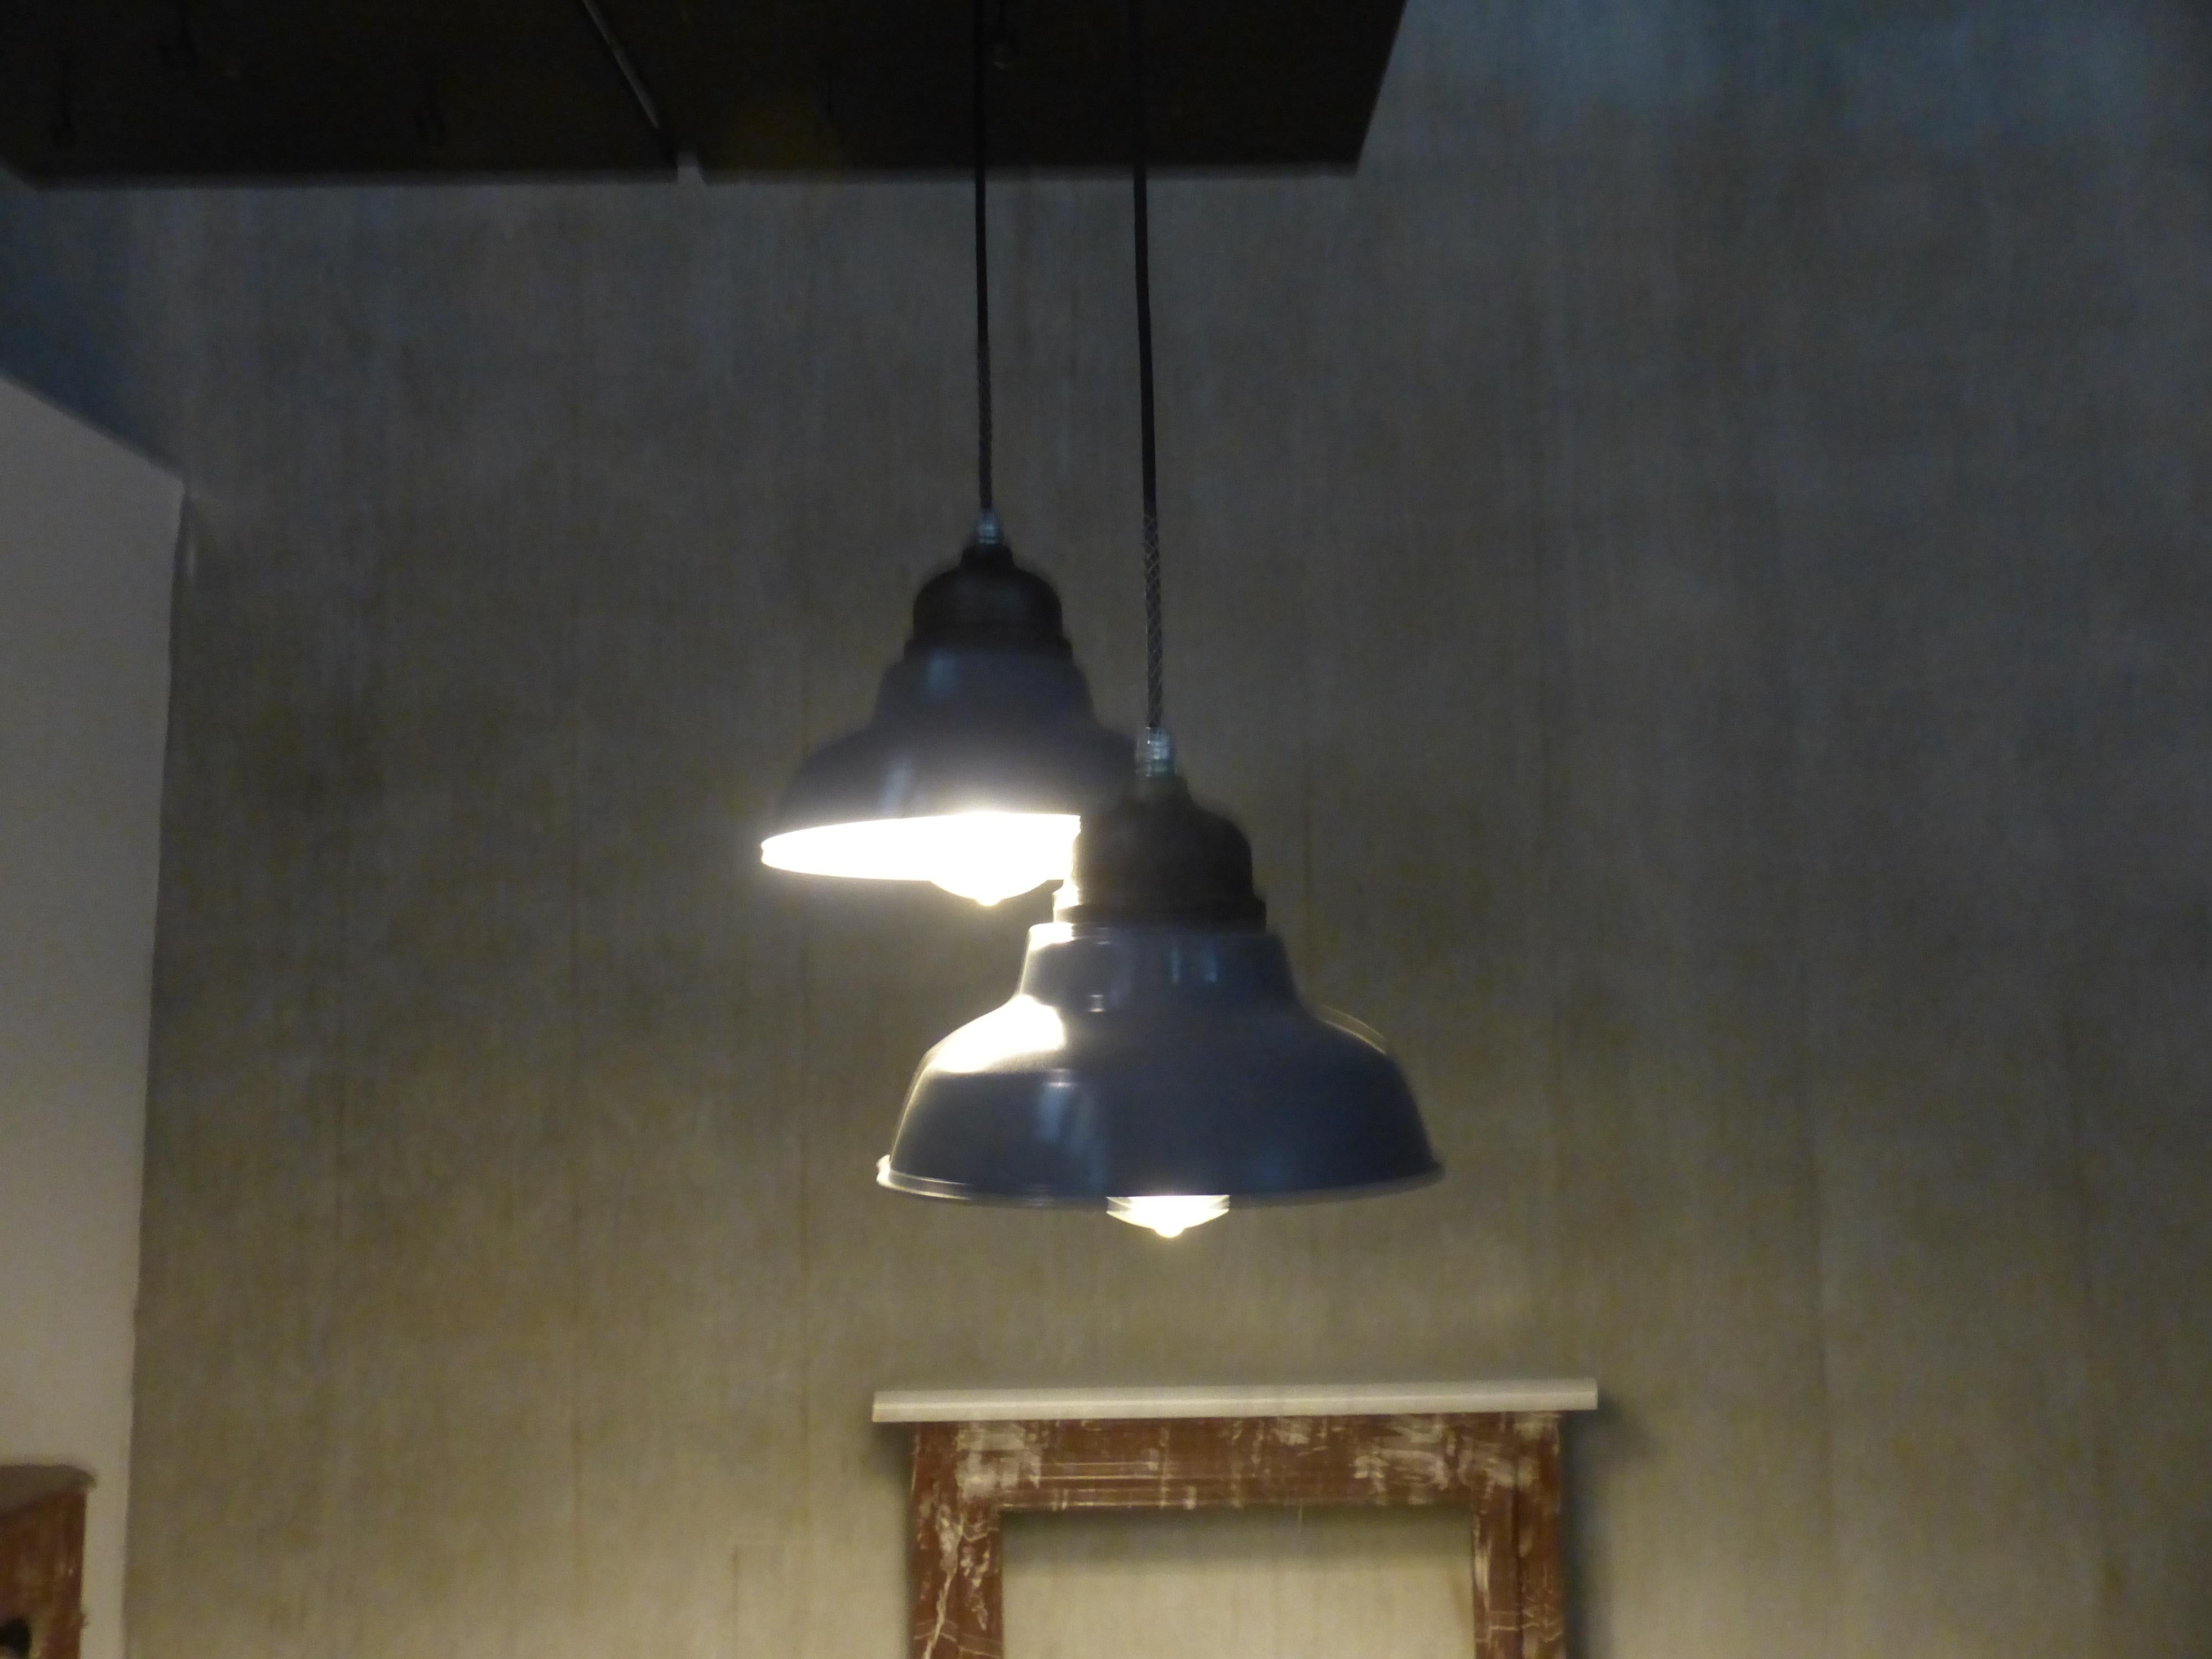 Set of two rewired Industrial pendants manufactured by Crouse hinds with glass globe, and soft grey painted finish on shade.
Csa approved and tested. 

Currently on 8 feet of cable, and complete with mounting cap for easy install.